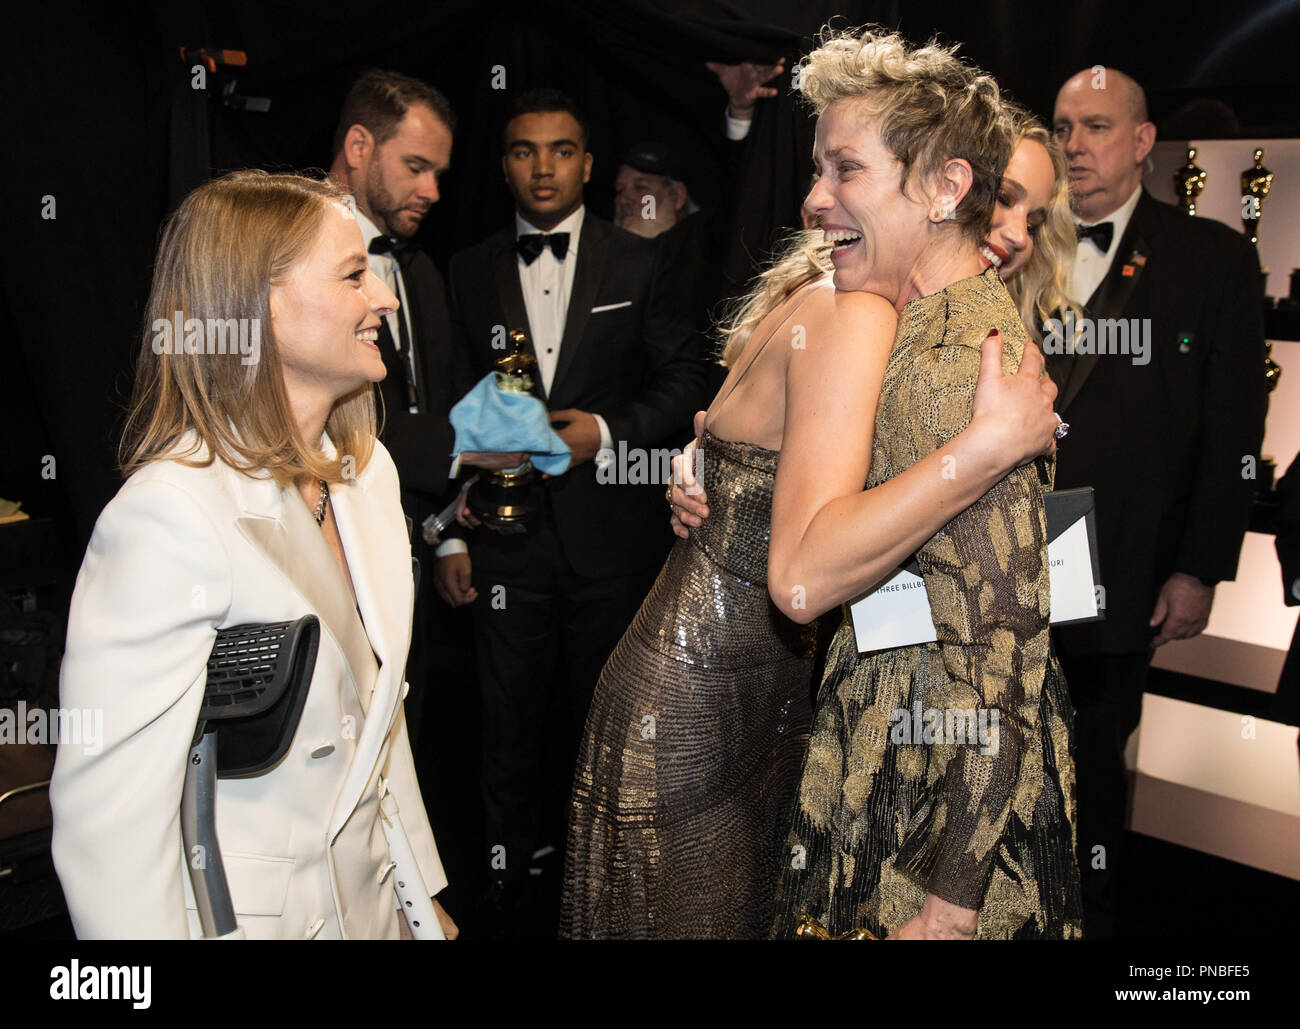 Jodi Foster and Jennifer Lawrence congratulate Frances McDormand backstage after presenting McDormand with the Oscar® for performance by an actress in a leading role for her work on “Three Billboards Outside Ebbing, Missouri” during the live ABC Telecast of The 90th Oscars® at the Dolby® Theatre in Hollywood, CA on Sunday, March 4, 2018.  File Reference # 33546 745PLX  For Editorial Use Only -  All Rights Reserved Stock Photo